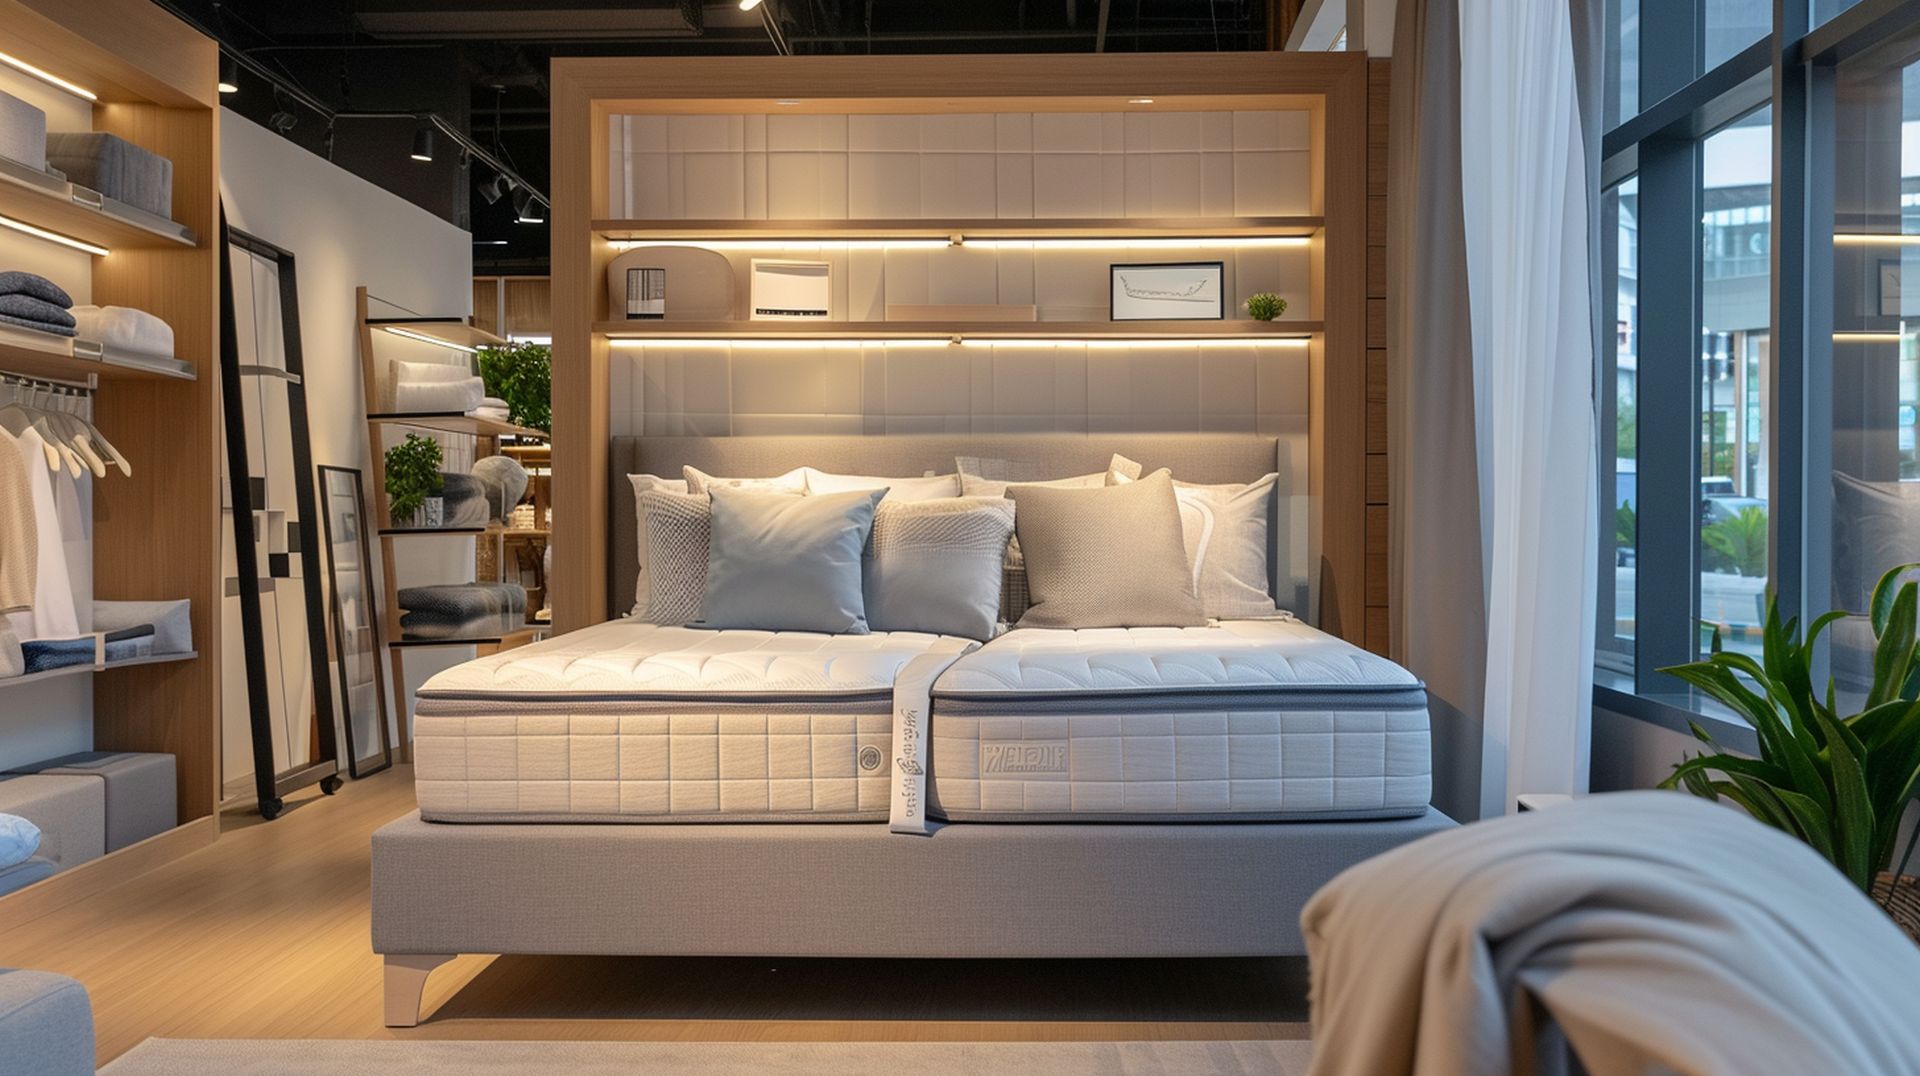 If you're looking for a new bed, mattress stores in Scottsdale offer the best customer and delivery service, financing, and warranties in Arizona